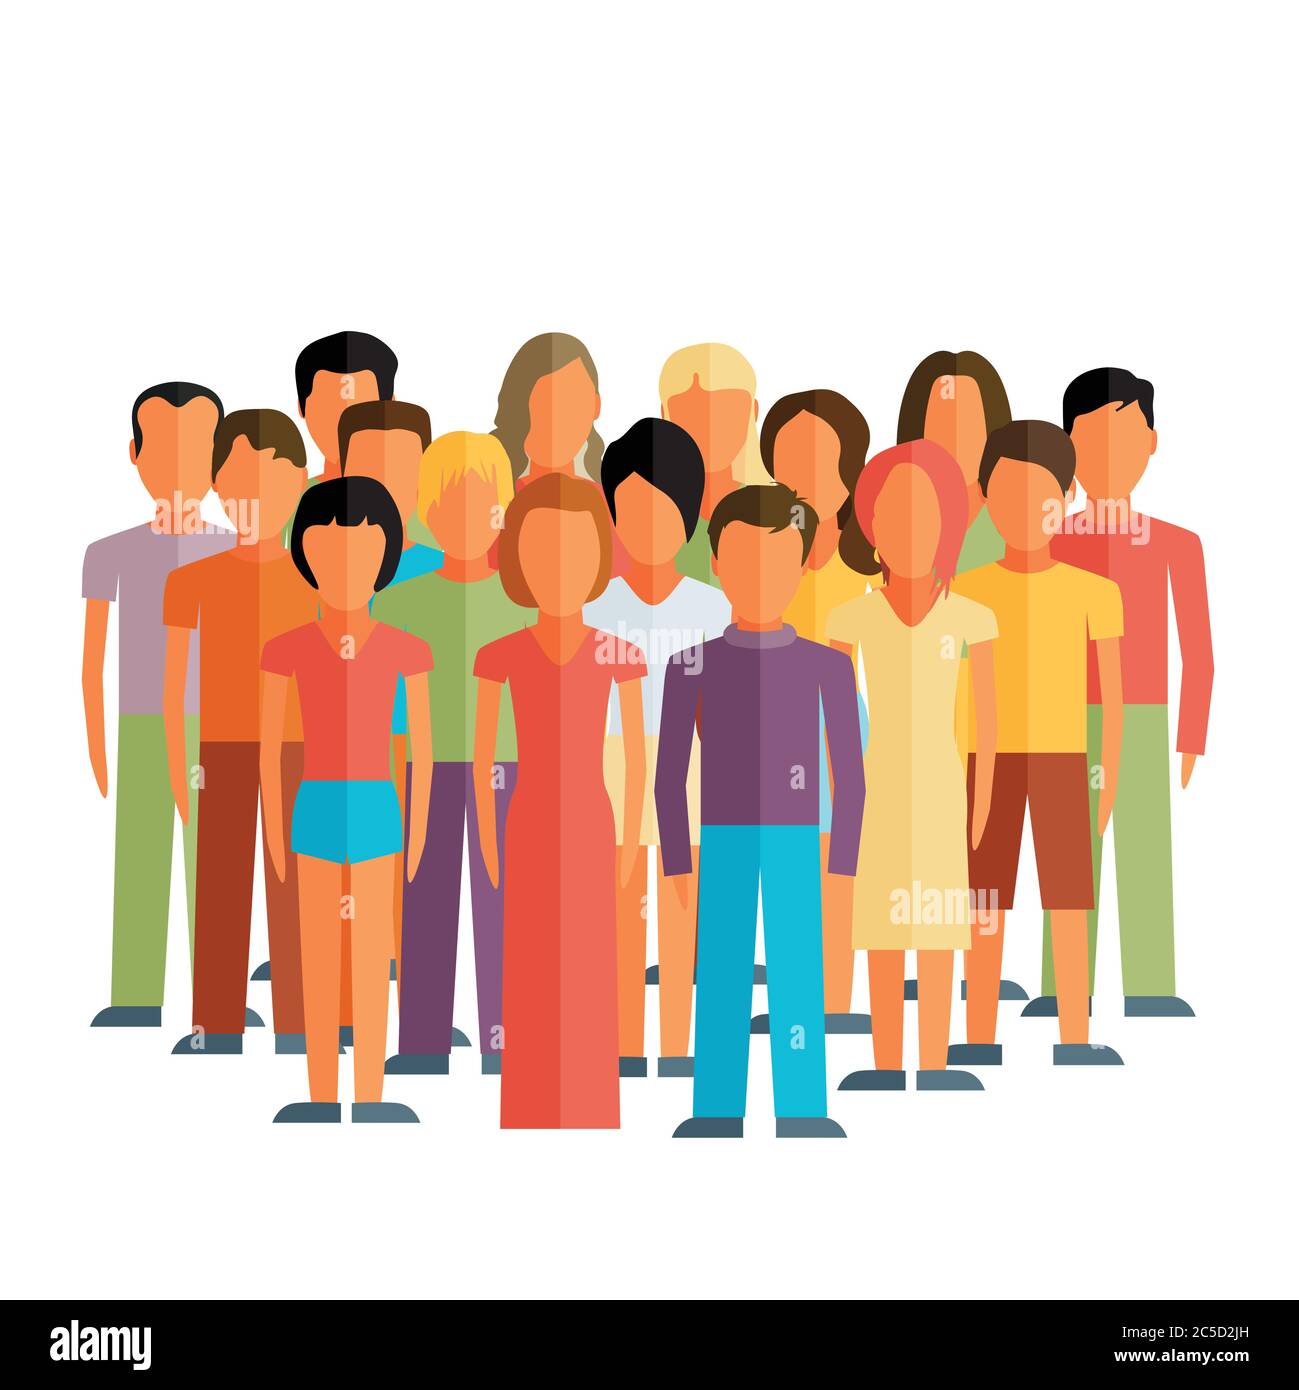 Flat illustration of society members with a large group of men and women Stock Vector